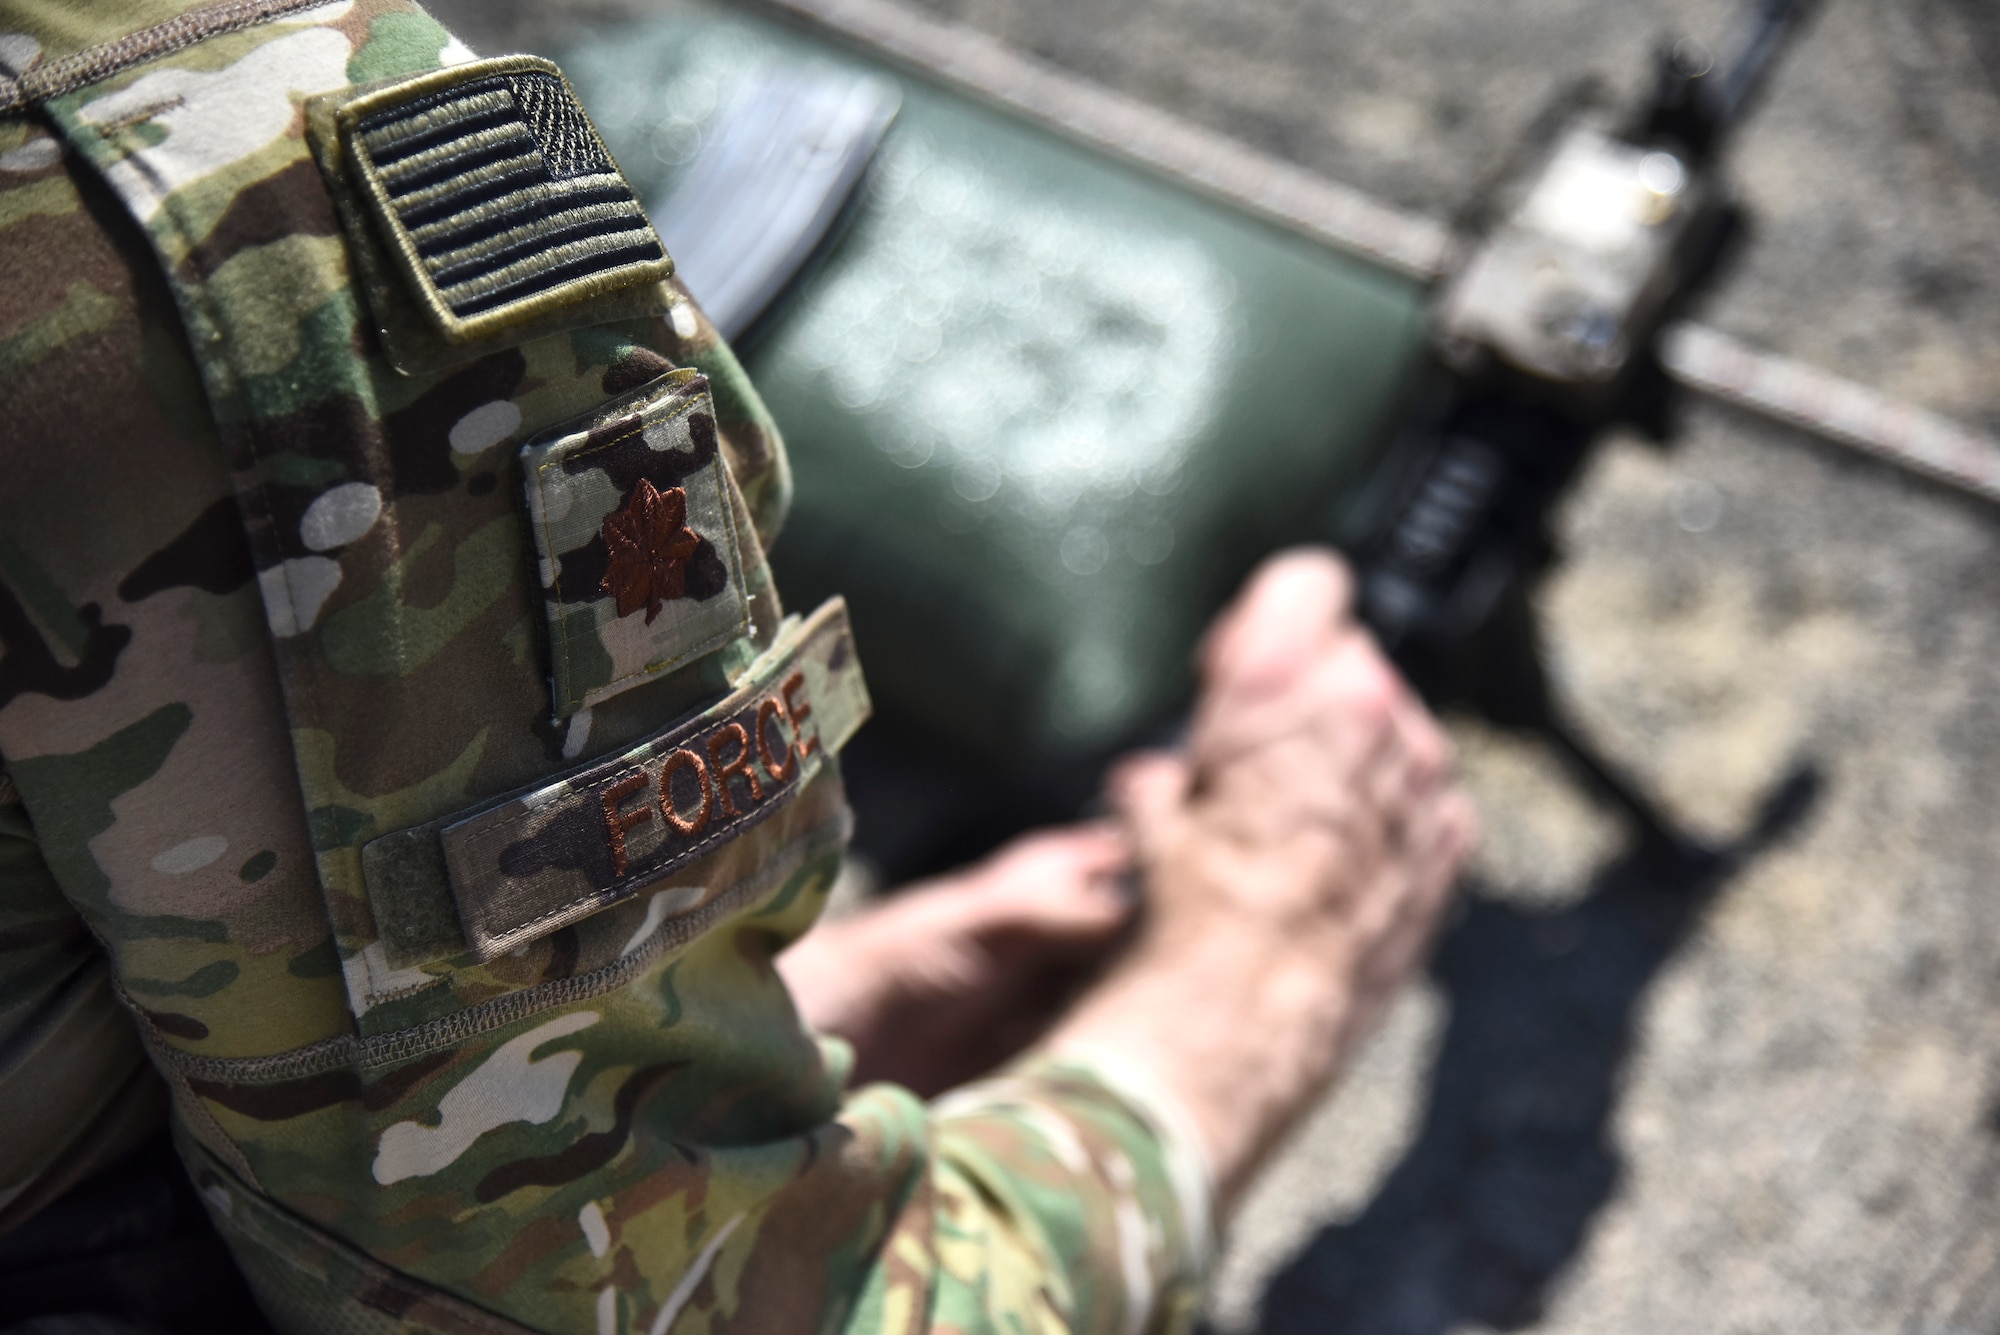 Maj. Michael Force, 380th Expeditionary Security Forces Squadron commander, adjusts the sights on his M4 Carbine weapon at Al Dhafra Air Base, United Arab Emirates, March 8, 2019. The M4 is a lightweight, gas operated, air cooled, magazine fed, selective rate, shoulder fired weapon with a collapsible stock, and is now the standard issue firearm for most units in the U.S. military. (U.S. Air Force photo by Senior Airman Mya M. Crosby)